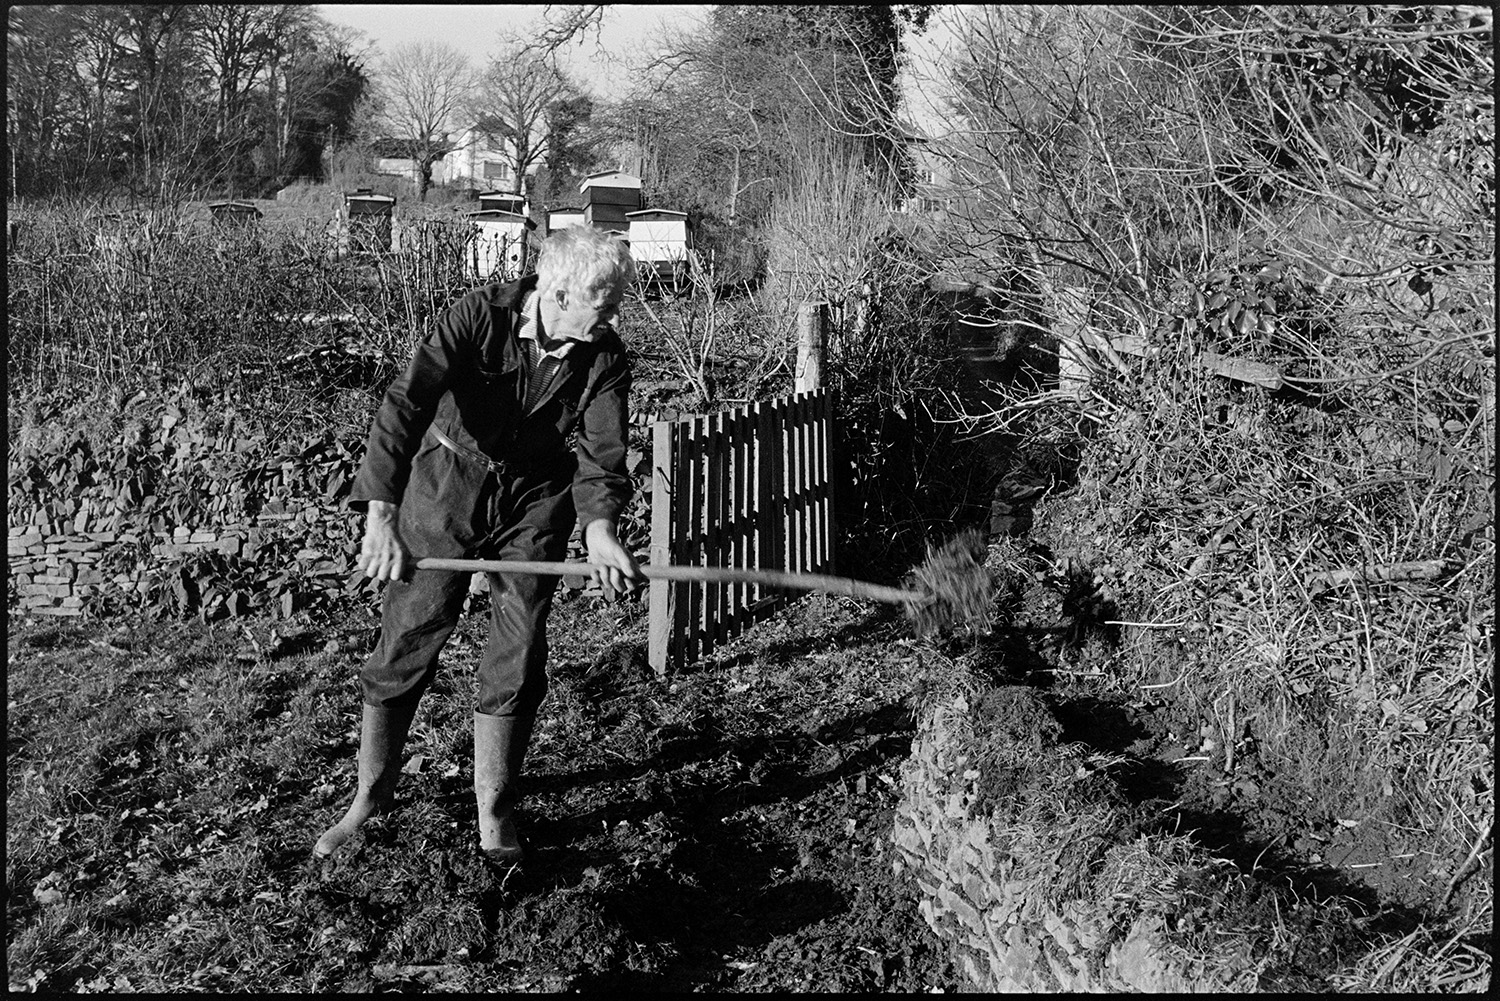 Man building hedge bank, putting earth on dry stone wall. 
[Geoff Darch building up a hedgebank with earth in a field at Chulmleigh. He is placing the earth on top of the dry stone wall at the bottom of the hedge with a spade. Bee hives can be seen in the background.]